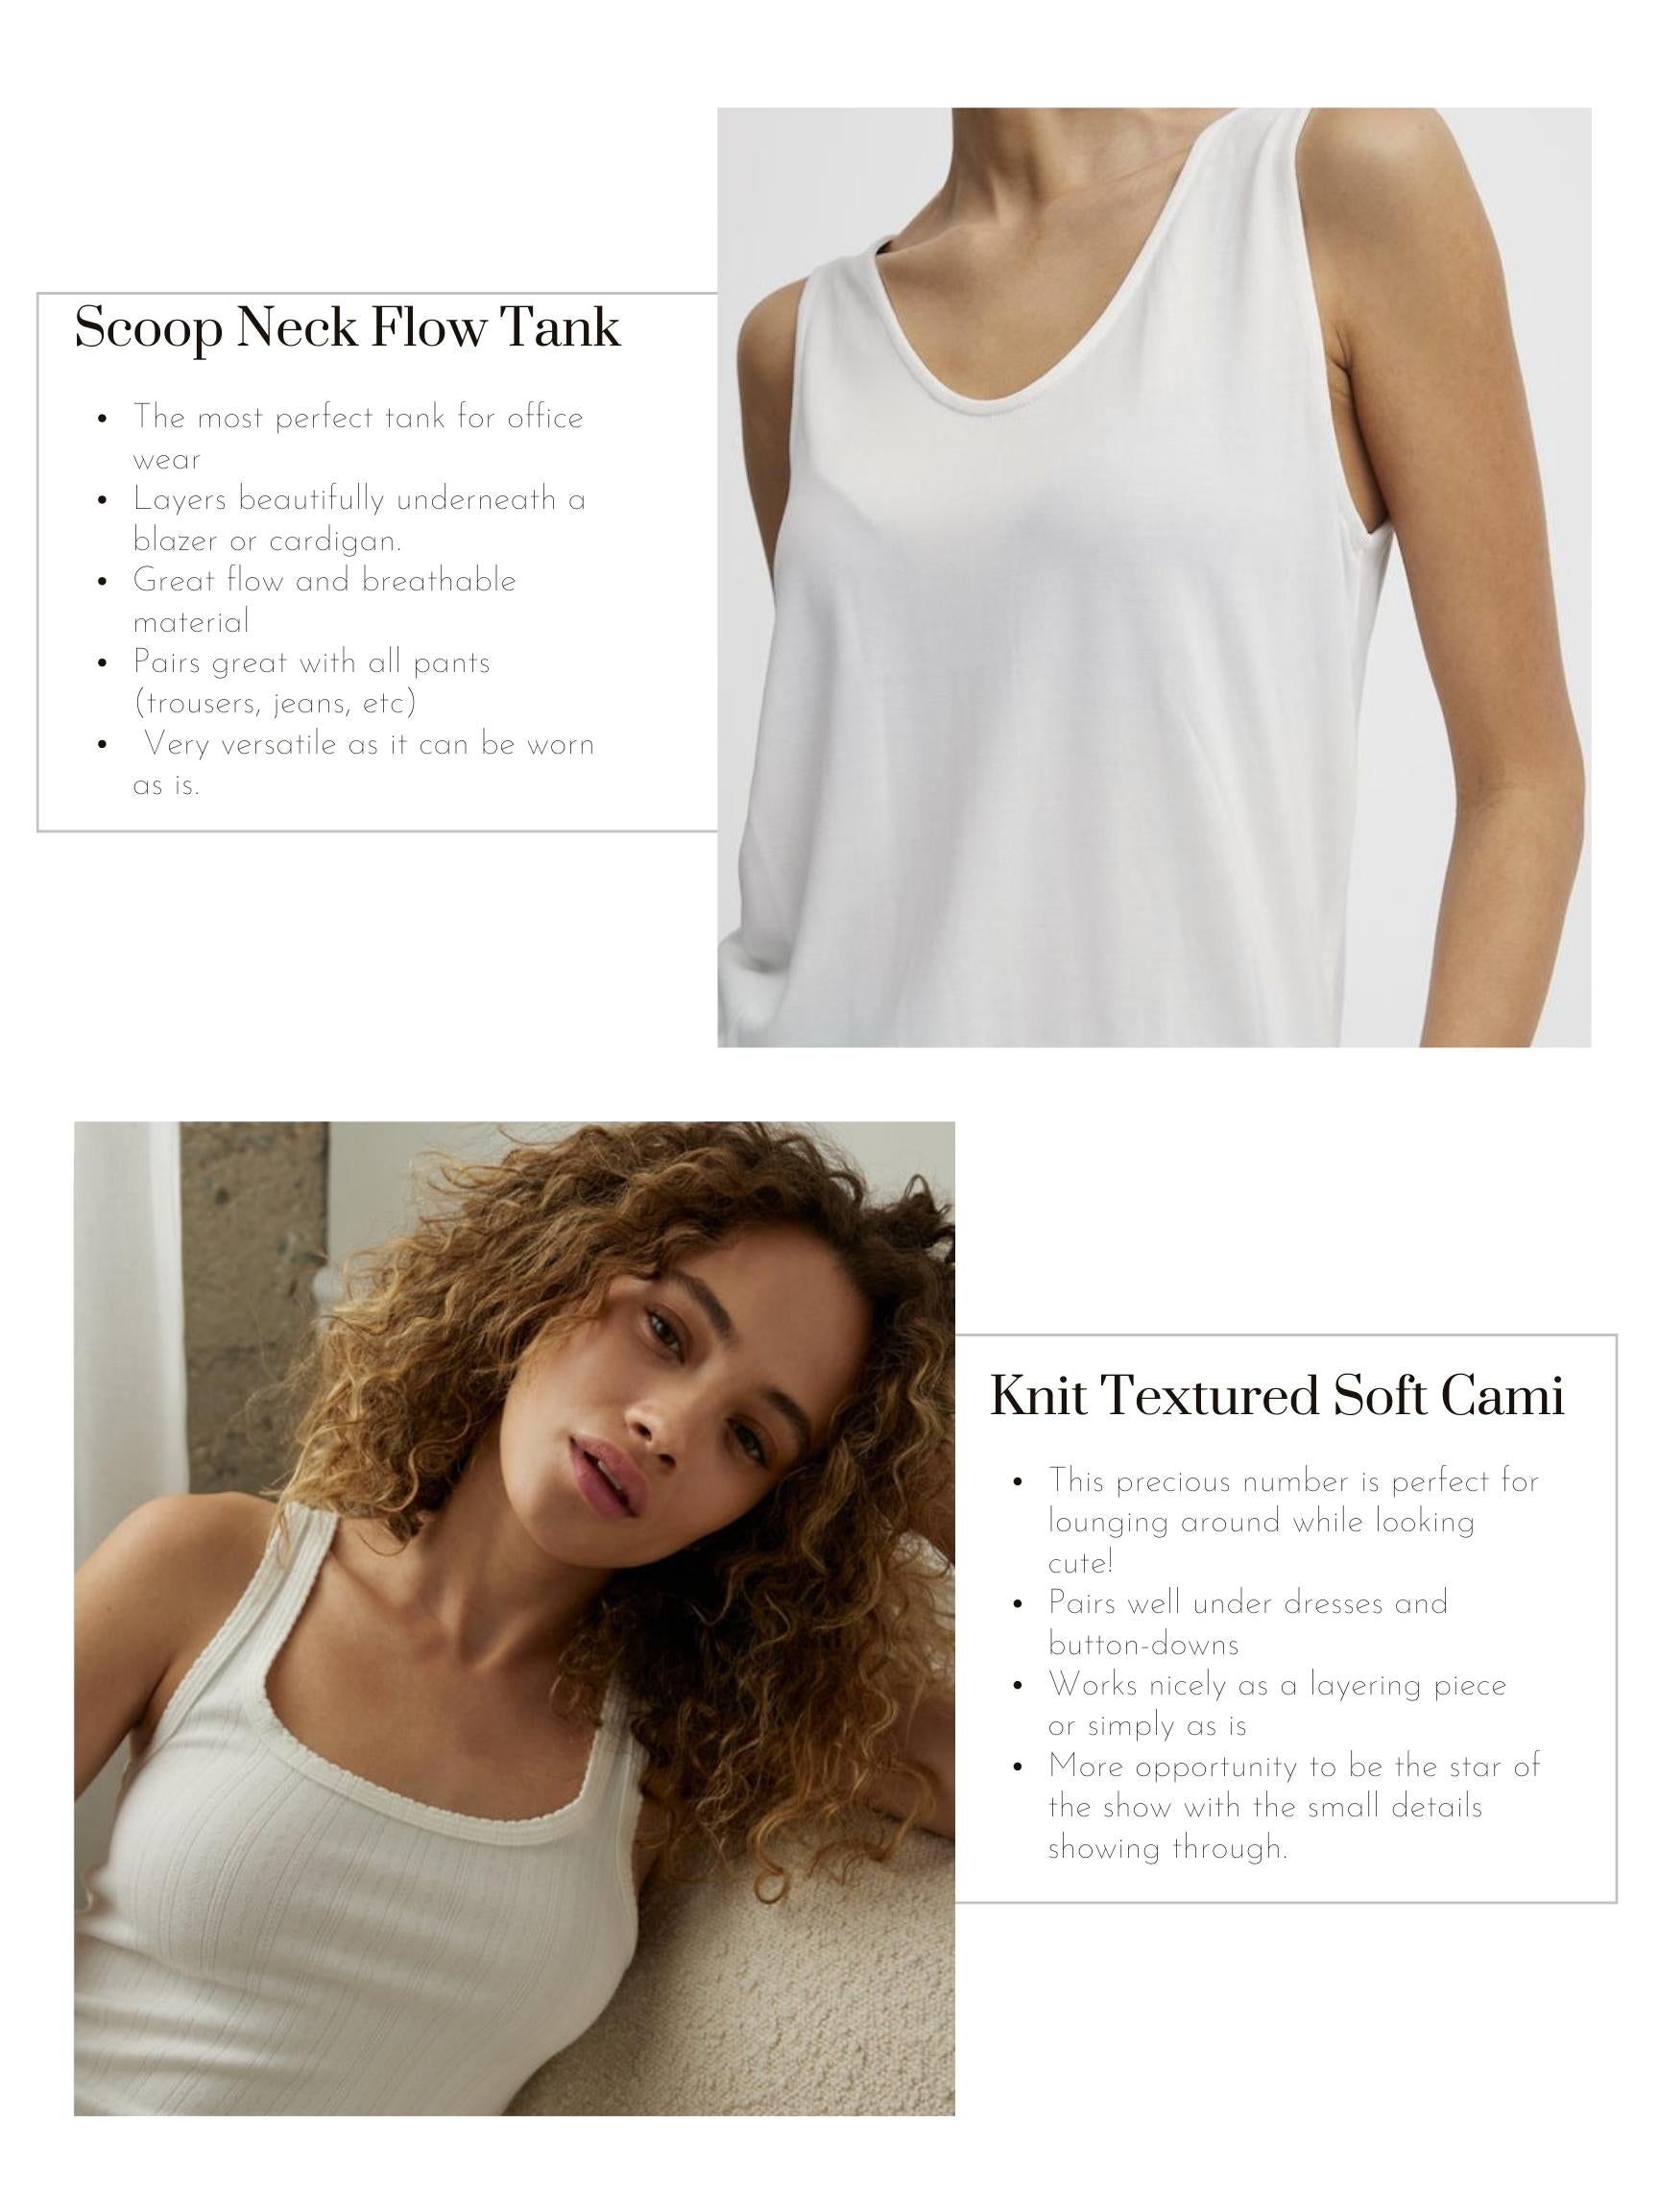 white tank closet fashion styling how to style top girl woman Basics Layering capsule closet wardrobe fashion How to wear styling style tips pieces spring summer girl clothing 